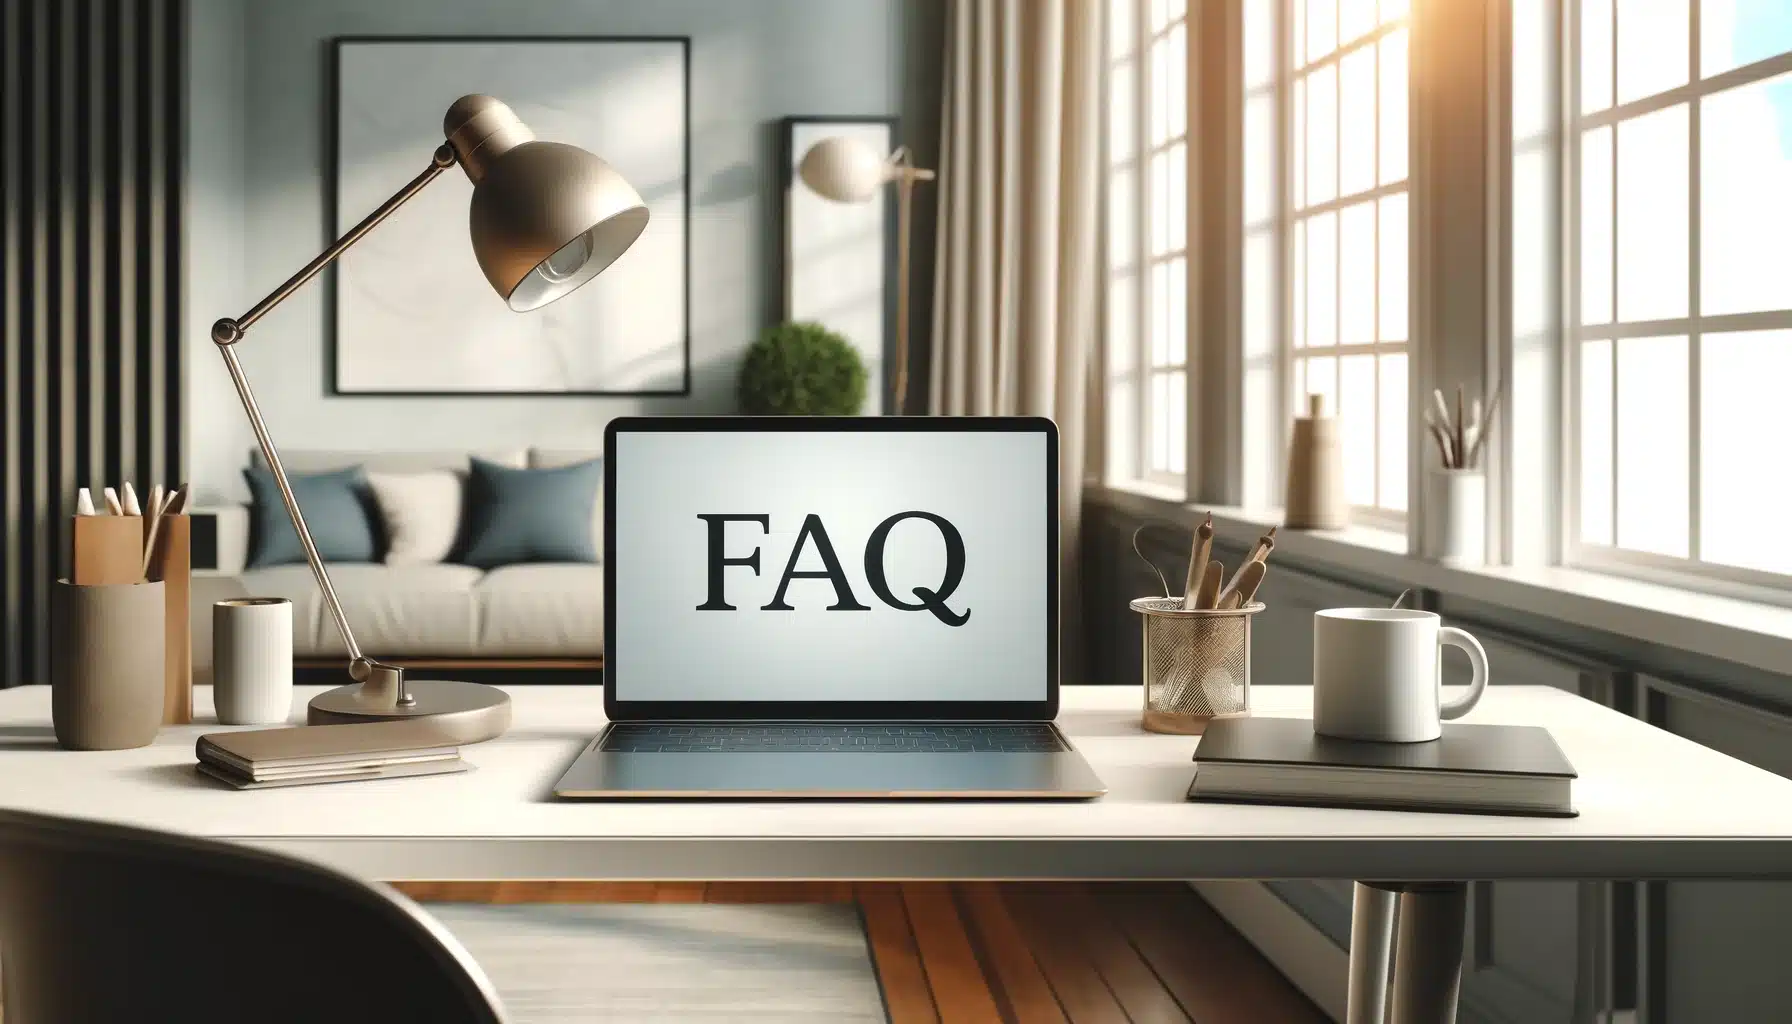 A modern home office with a laptop displaying 'FAQ' on its screen, set on a minimalist desk with a desk lamp and a decorative plant, illuminated by natural light from a large window.